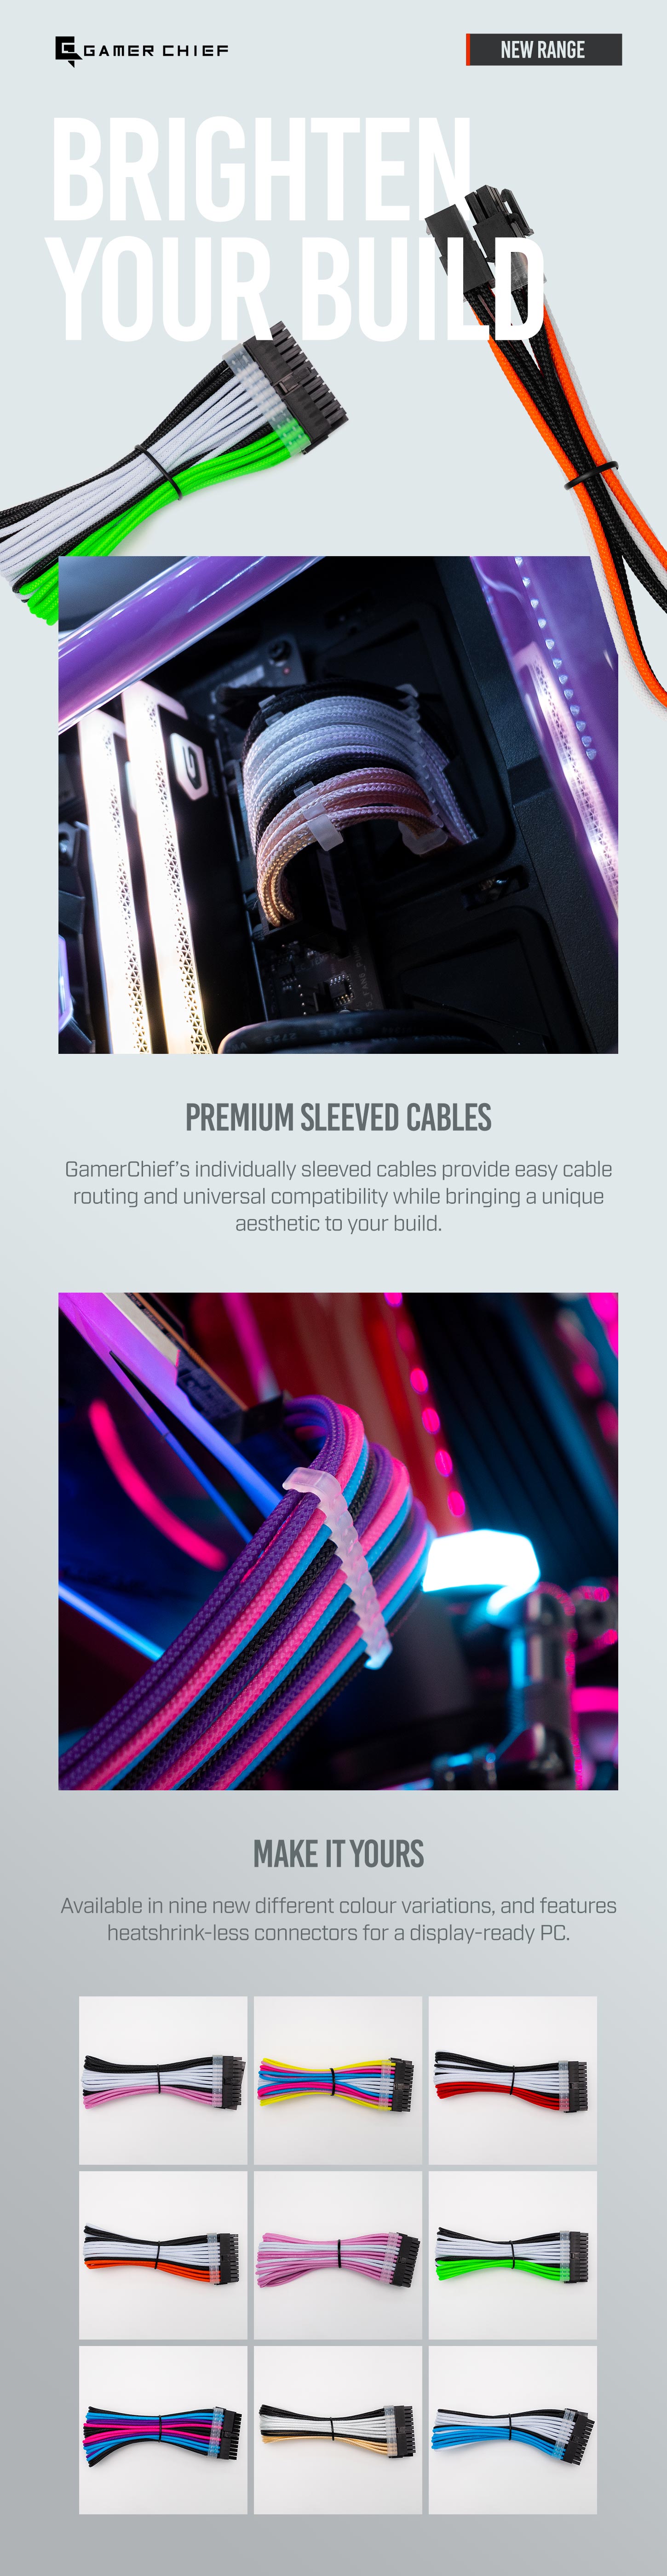 A large marketing image providing additional information about the product GamerChief Elite Series 8-Pin PCIe 30cm Sleeved Extension Cable (Pink/White/Black) - Additional alt info not provided